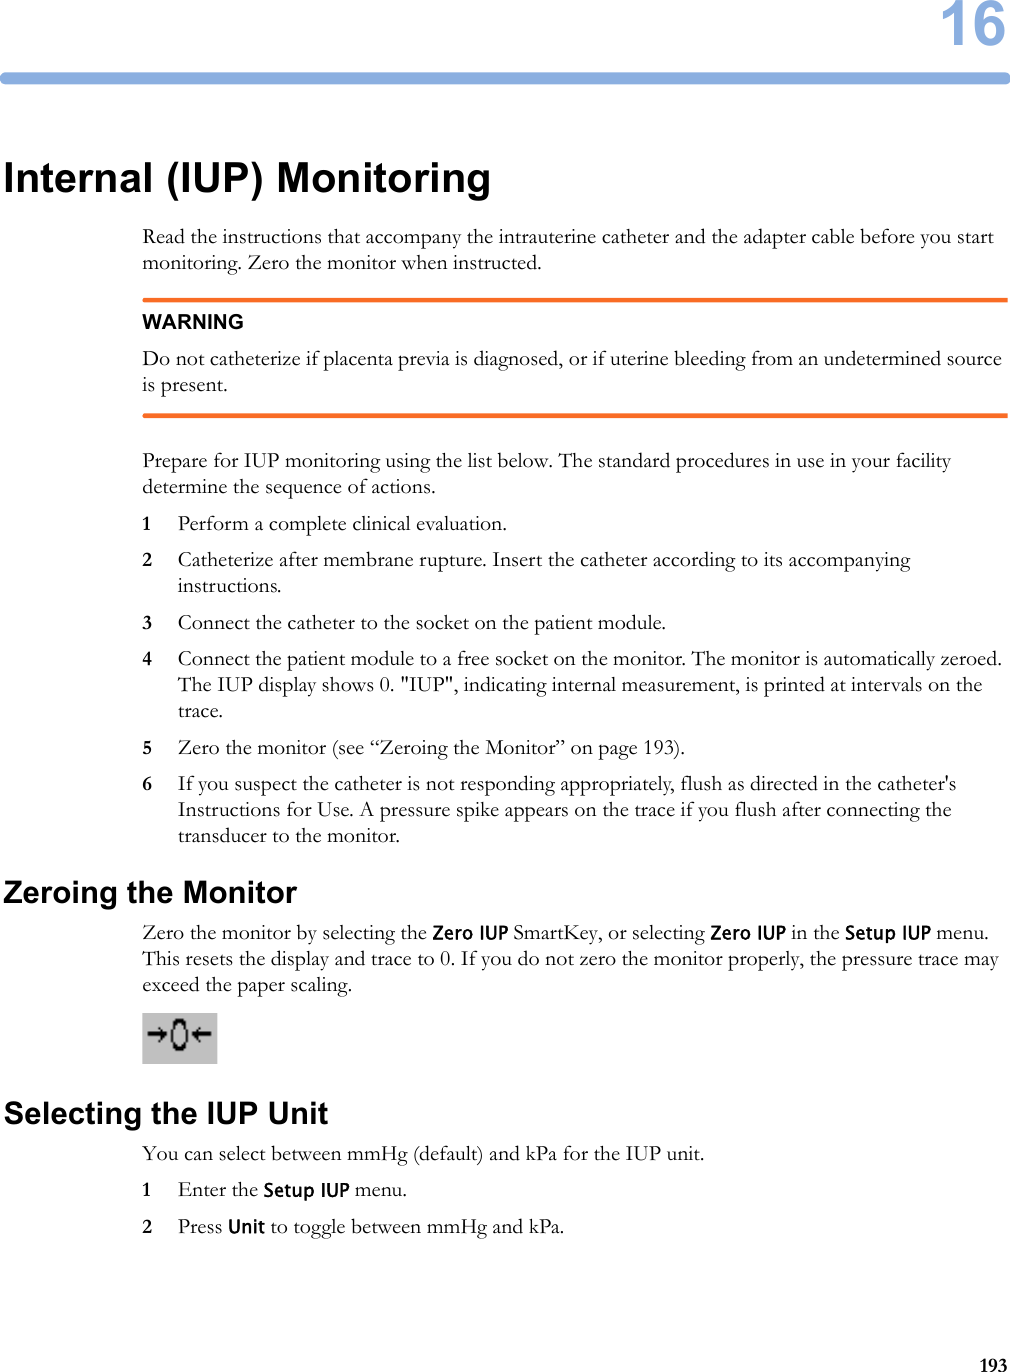 16193Internal (IUP) MonitoringRead the instructions that accompany the intrauterine catheter and the adapter cable before you start monitoring. Zero the monitor when instructed.WARNINGDo not catheterize if placenta previa is diagnosed, or if uterine bleeding from an undetermined source is present.Prepare for IUP monitoring using the list below. The standard procedures in use in your facility determine the sequence of actions.1Perform a complete clinical evaluation.2Catheterize after membrane rupture. Insert the catheter according to its accompanying instructions.3Connect the catheter to the socket on the patient module.4Connect the patient module to a free socket on the monitor. The monitor is automatically zeroed. The IUP display shows 0. &quot;IUP&quot;, indicating internal measurement, is printed at intervals on the trace.5Zero the monitor (see “Zeroing the Monitor” on page 193).6If you suspect the catheter is not responding appropriately, flush as directed in the catheter&apos;s Instructions for Use. A pressure spike appears on the trace if you flush after connecting the transducer to the monitor.Zeroing the MonitorZero the monitor by selecting the Zero IUP SmartKey, or selecting Zero IUP in the Setup IUP menu. This resets the display and trace to 0. If you do not zero the monitor properly, the pressure trace may exceed the paper scaling.Selecting the IUP UnitYou can select between mmHg (default) and kPa for the IUP unit.1Enter the Setup IUP menu.2Press Unit to toggle between mmHg and kPa.